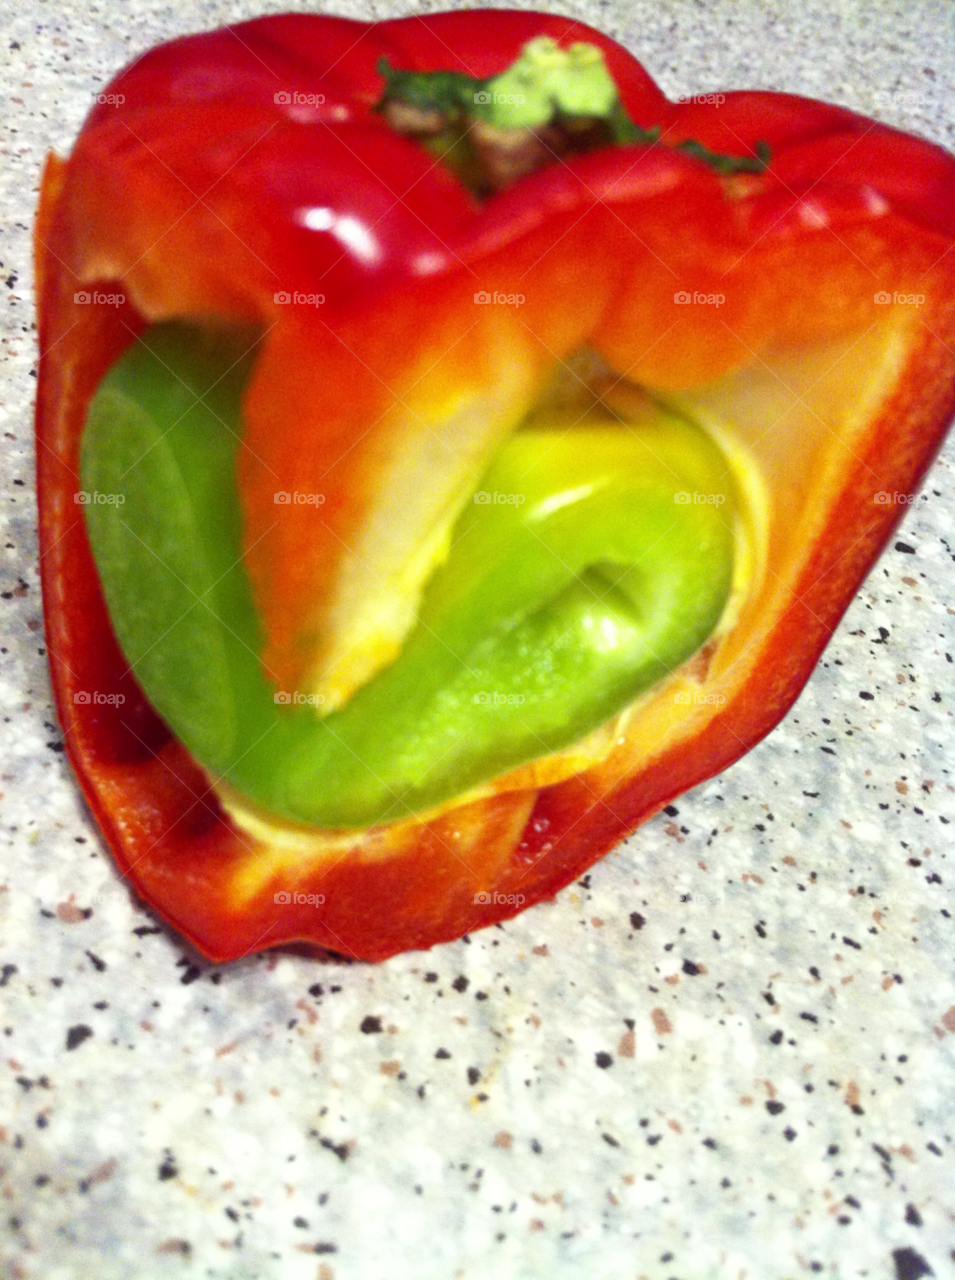 green red pepper pregnant pepper by alexloliver